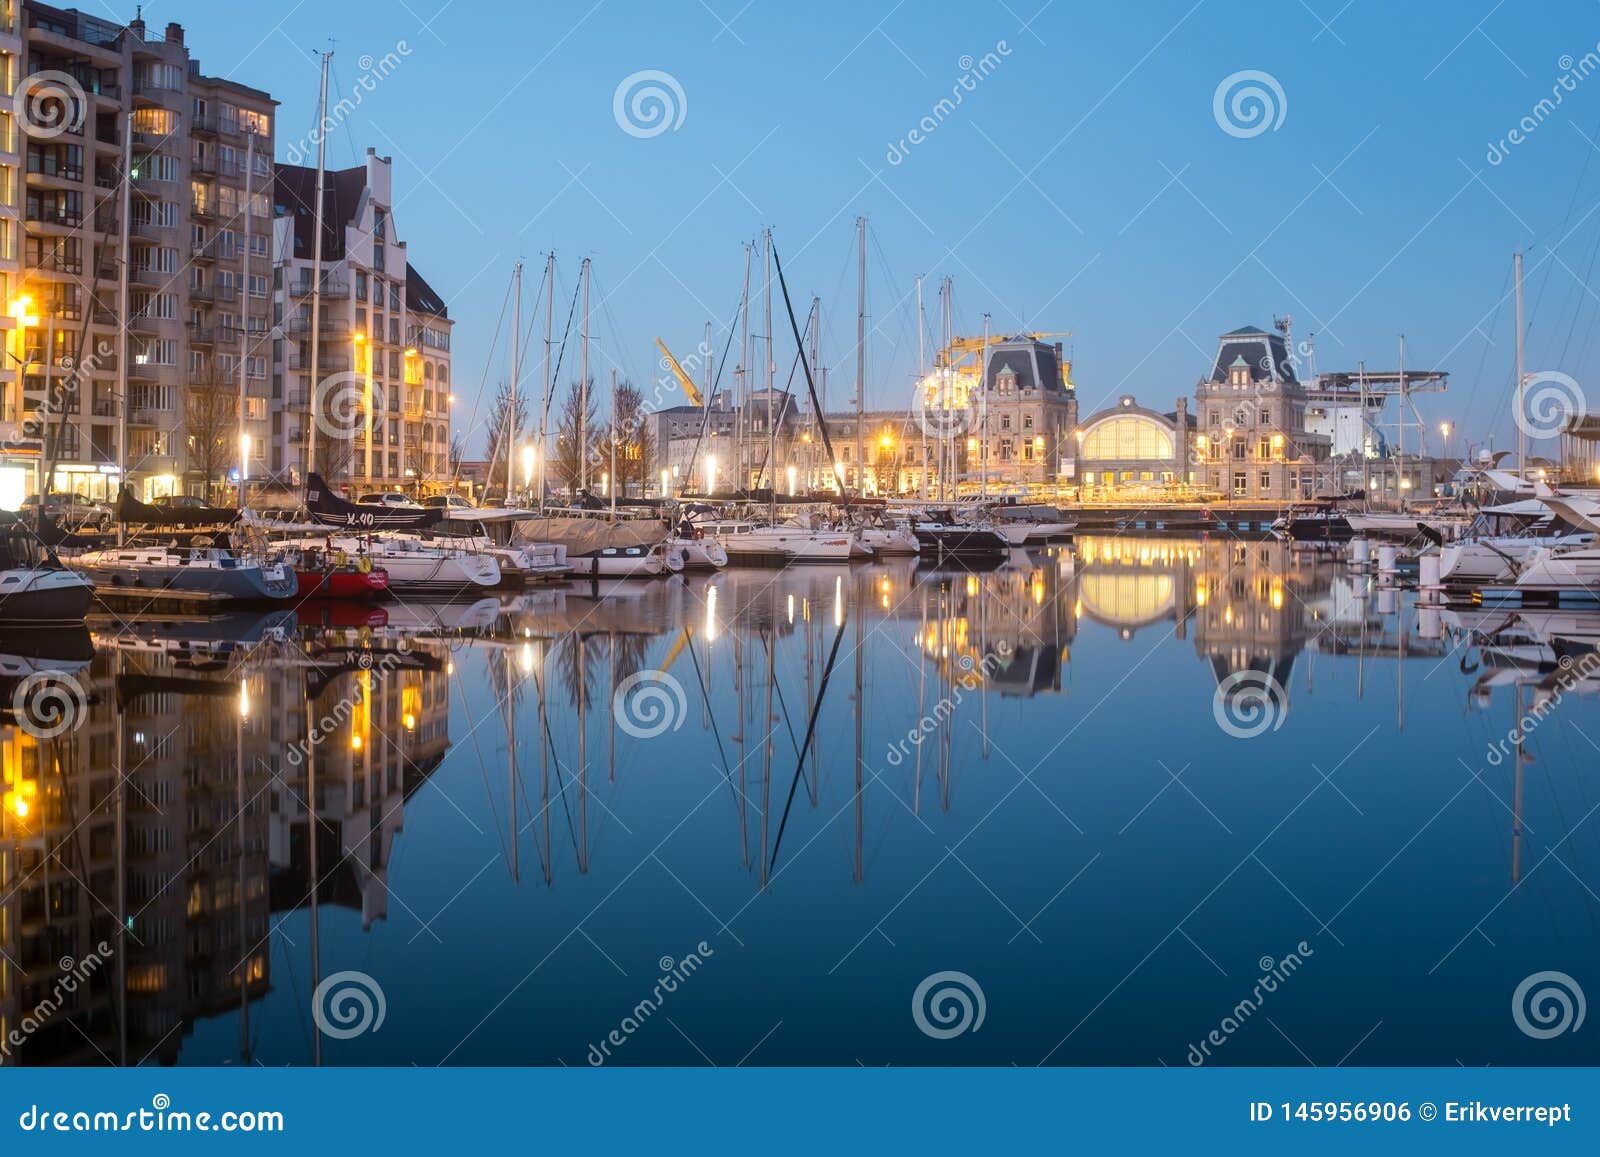 Old Train Station of Ostend Reflected in the Marina Stock Photo - Image ...